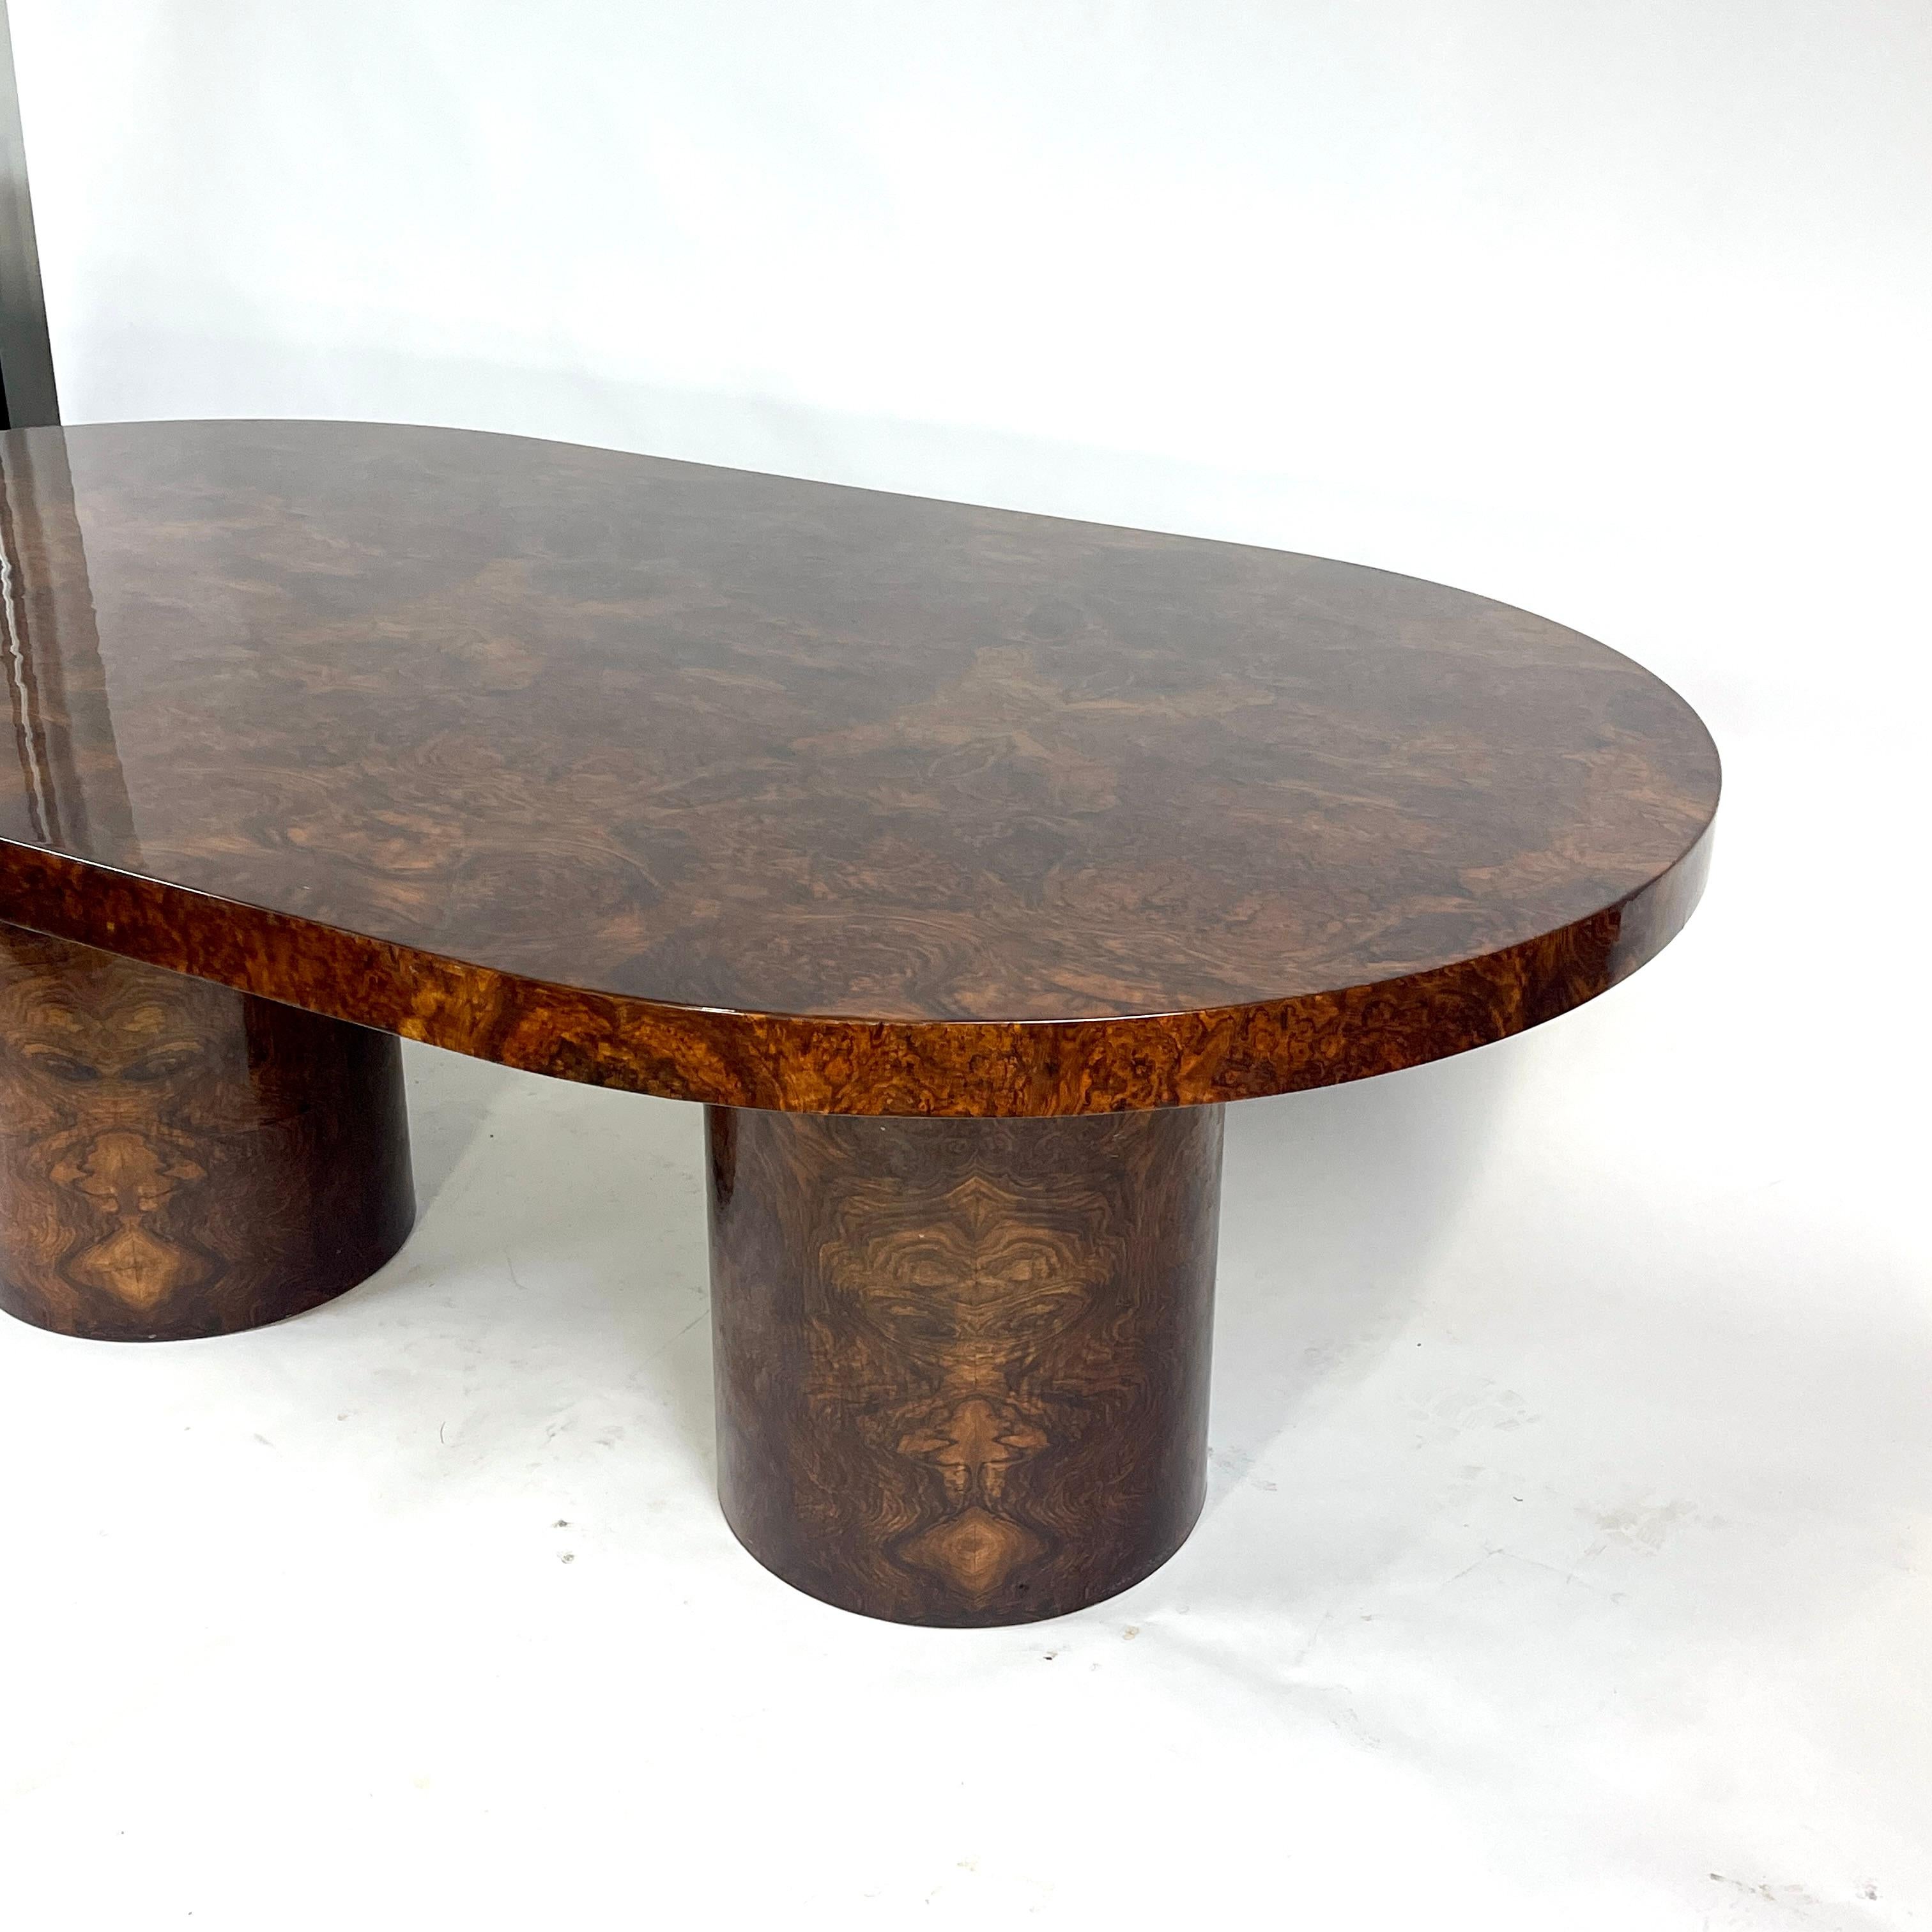 20th Century Lacquered Burled Mahogany Oval Dining Table by Paul Mayen for Intrex Habitat